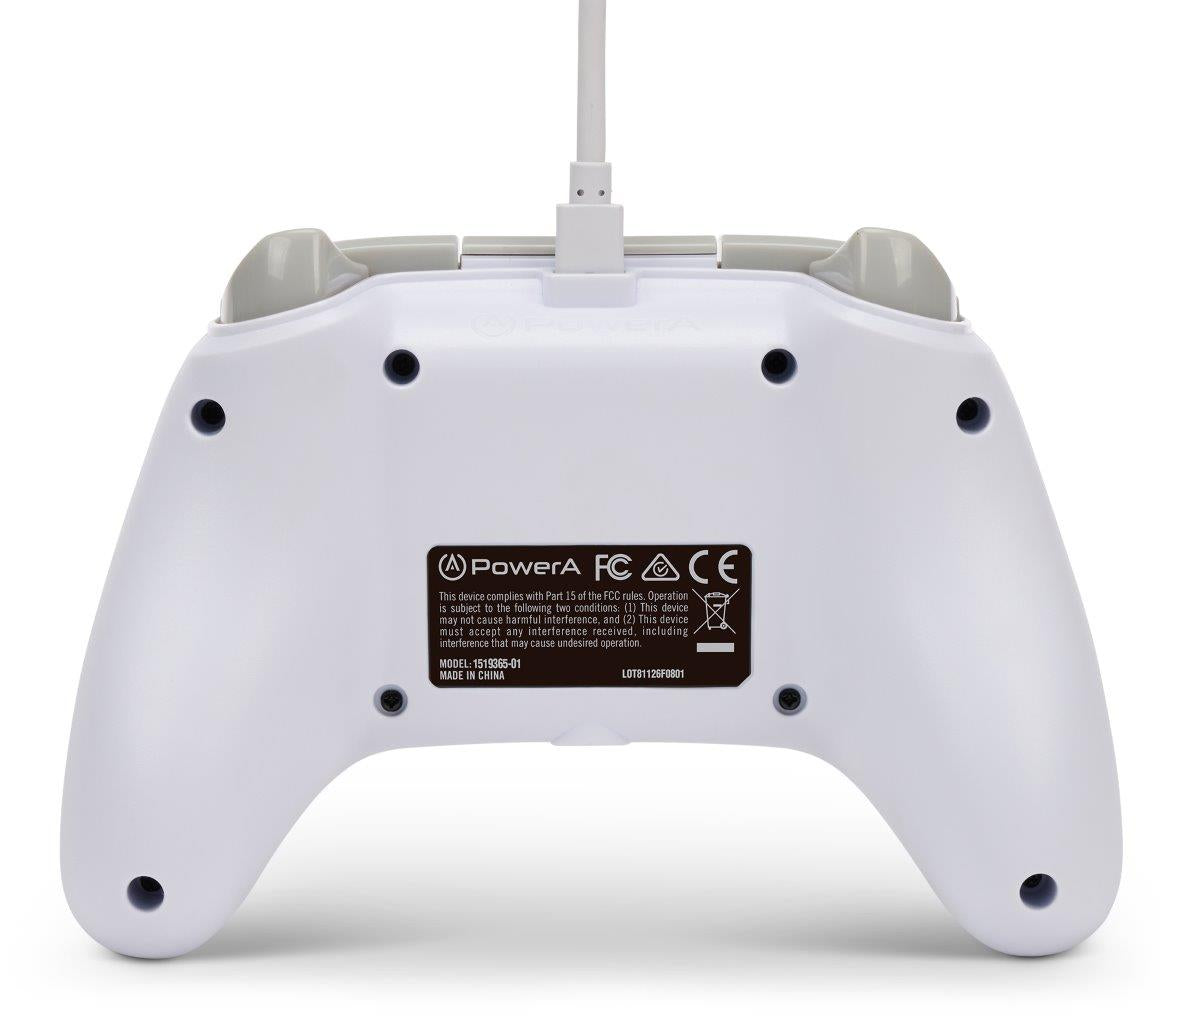 PowerA Wired Controller for Xbox Series X|S - White